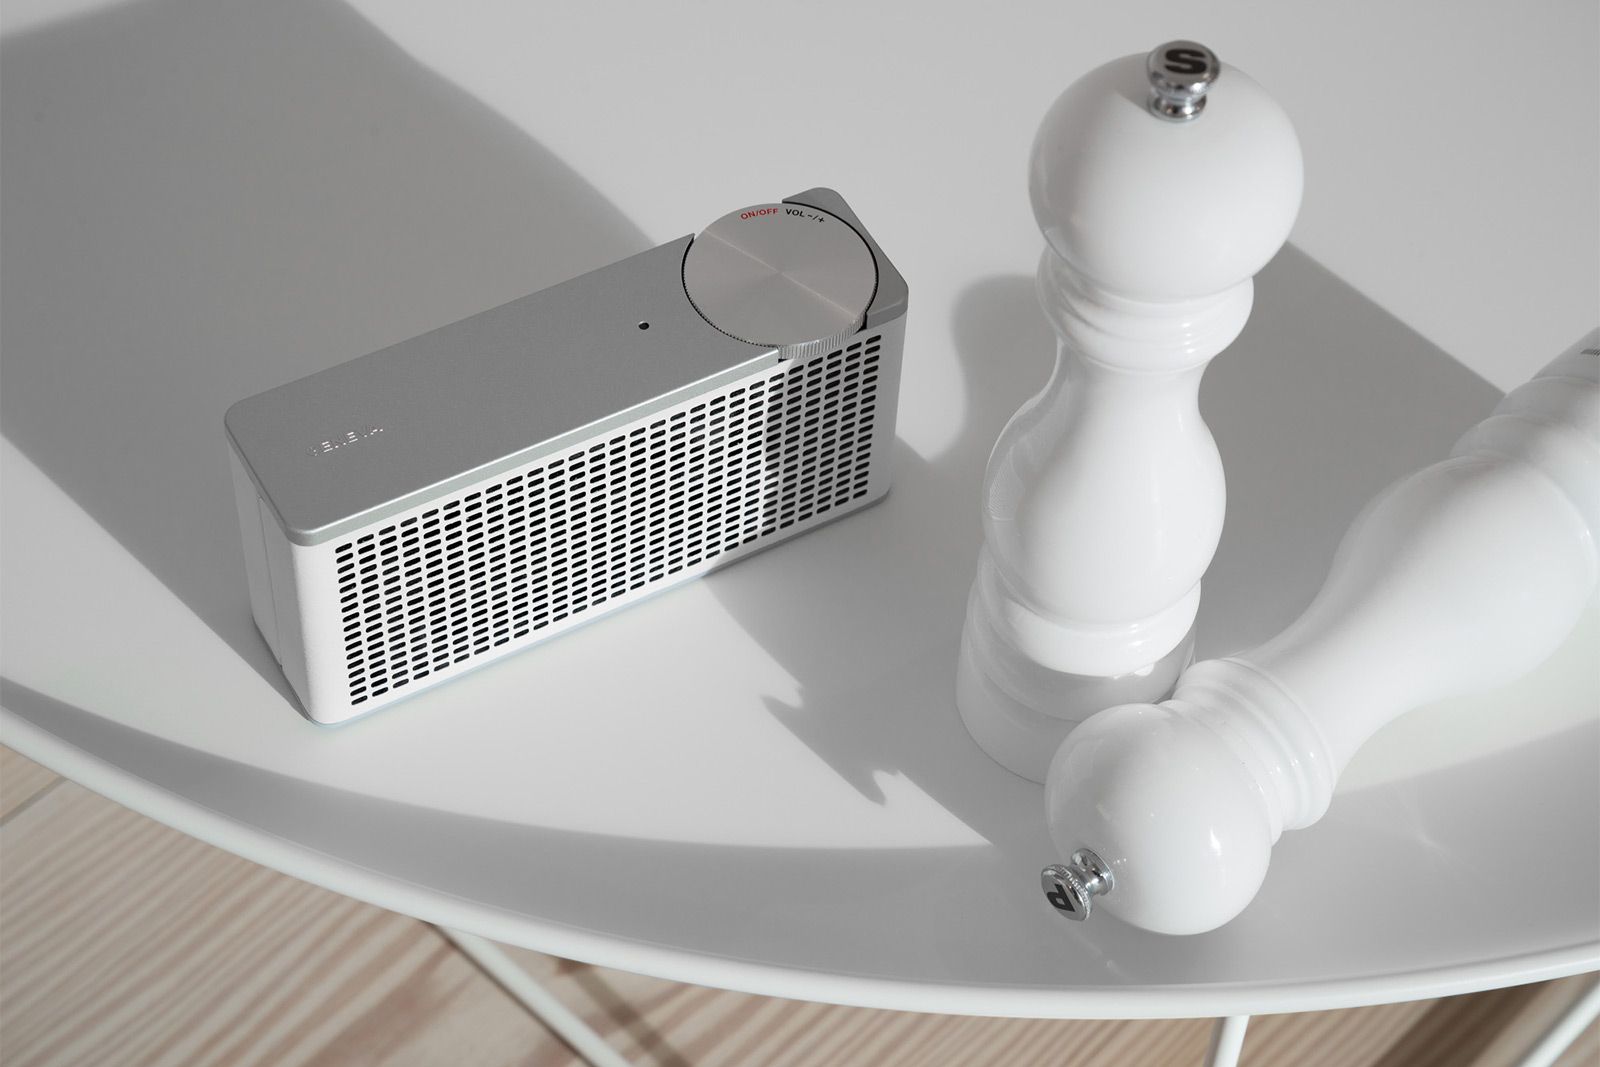 Geneva TouringxS is a Bluetooth speaker with style and substance image 1